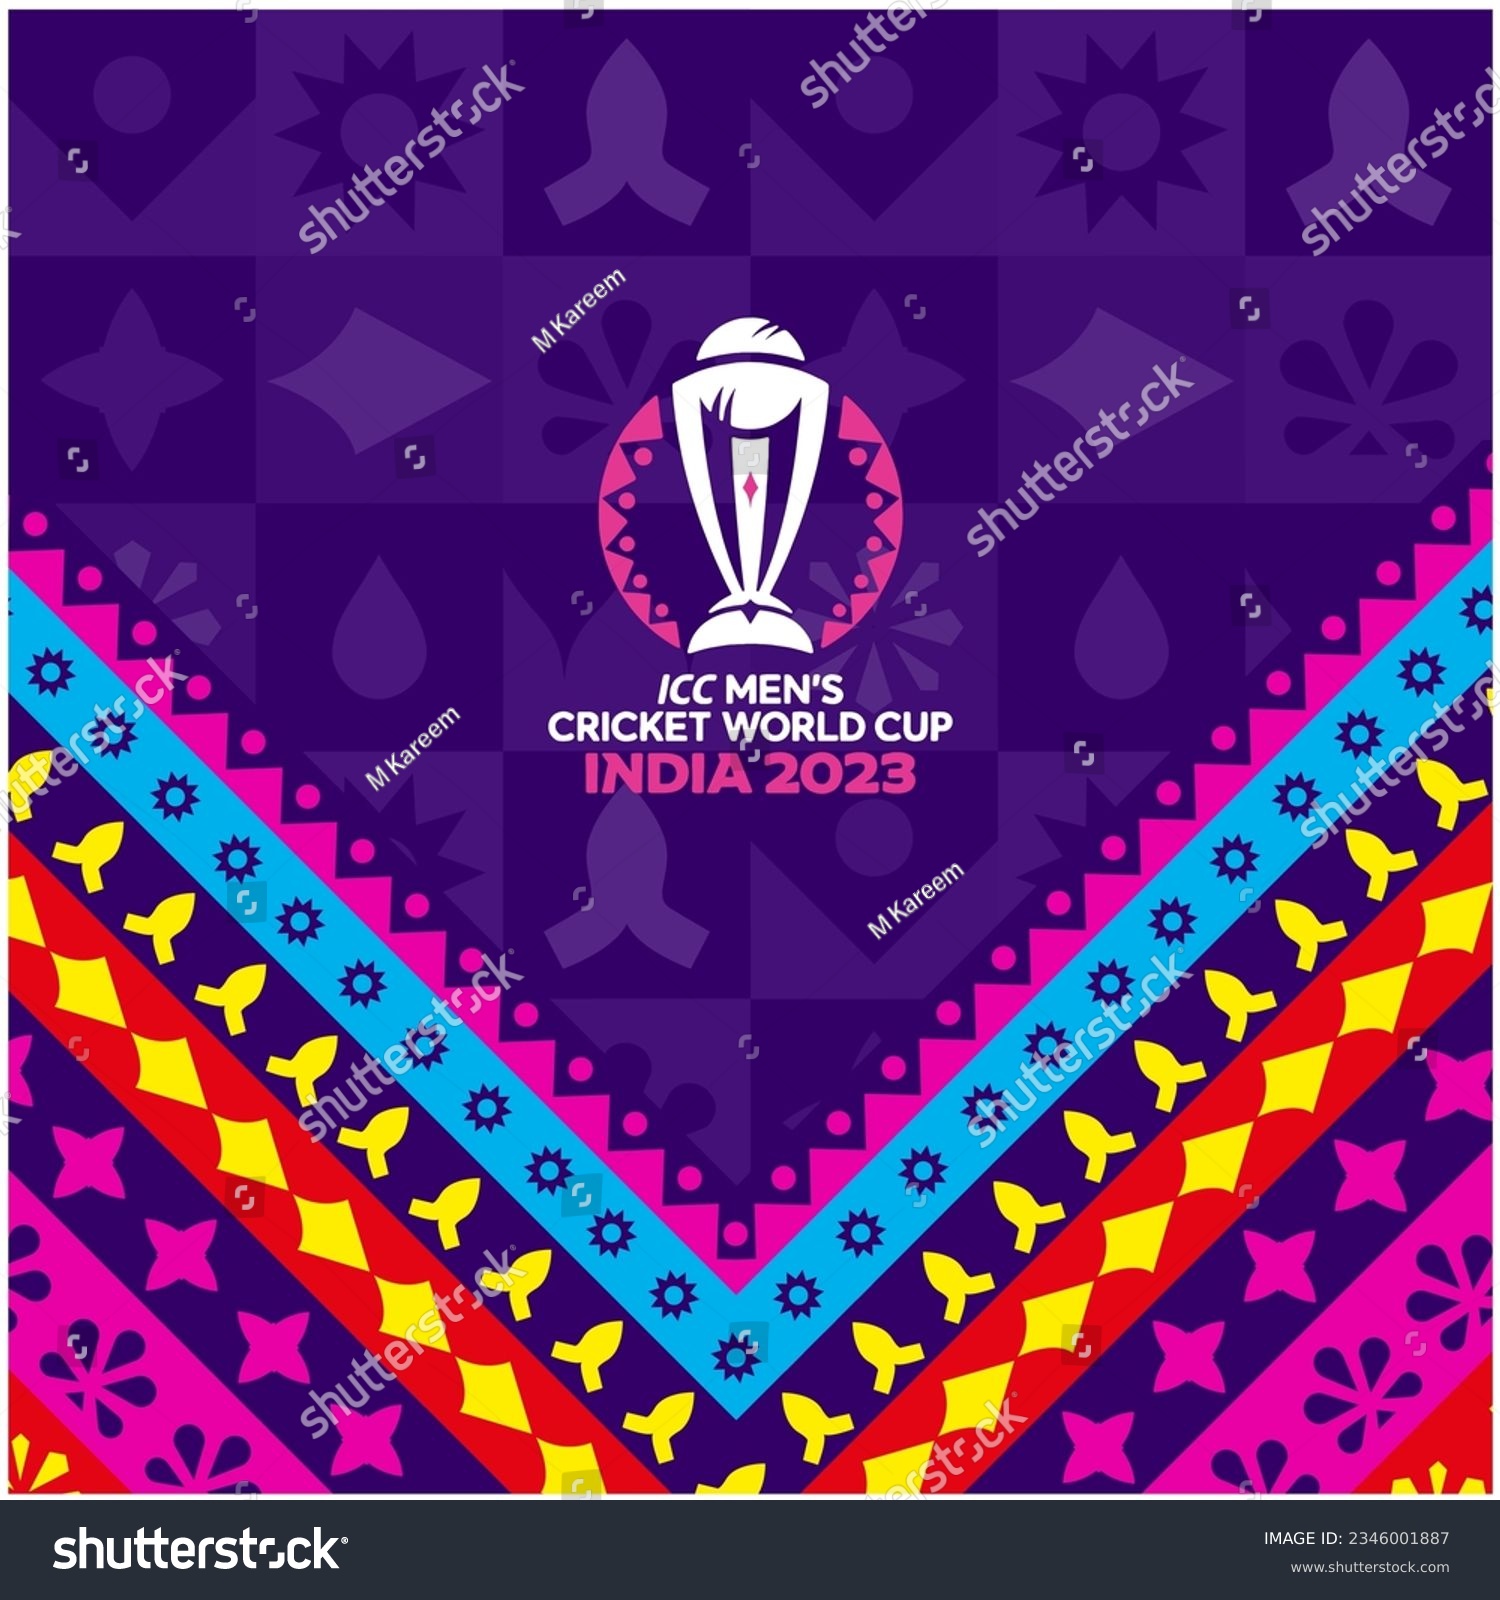 SVG of Karachi, Pakistan-August 11, 2023: Brand identity of the ICC Mens Cricket World Cup 2023 India theme vector banner with icons. vector illustration. svg